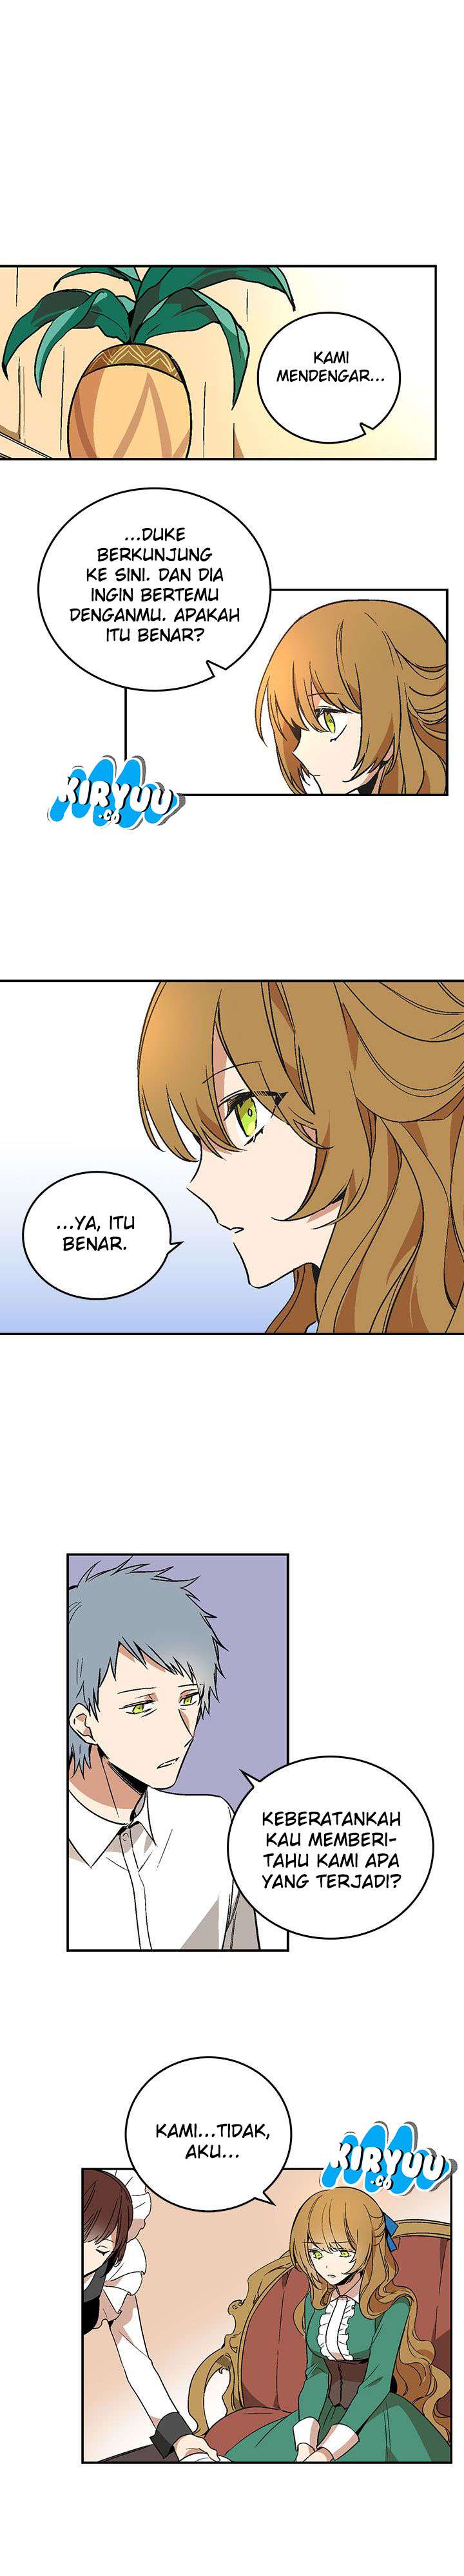 The Reason Why Raeliana Ended Up at the Duke’s Mansion Chapter 5 Bahasa Indonesia